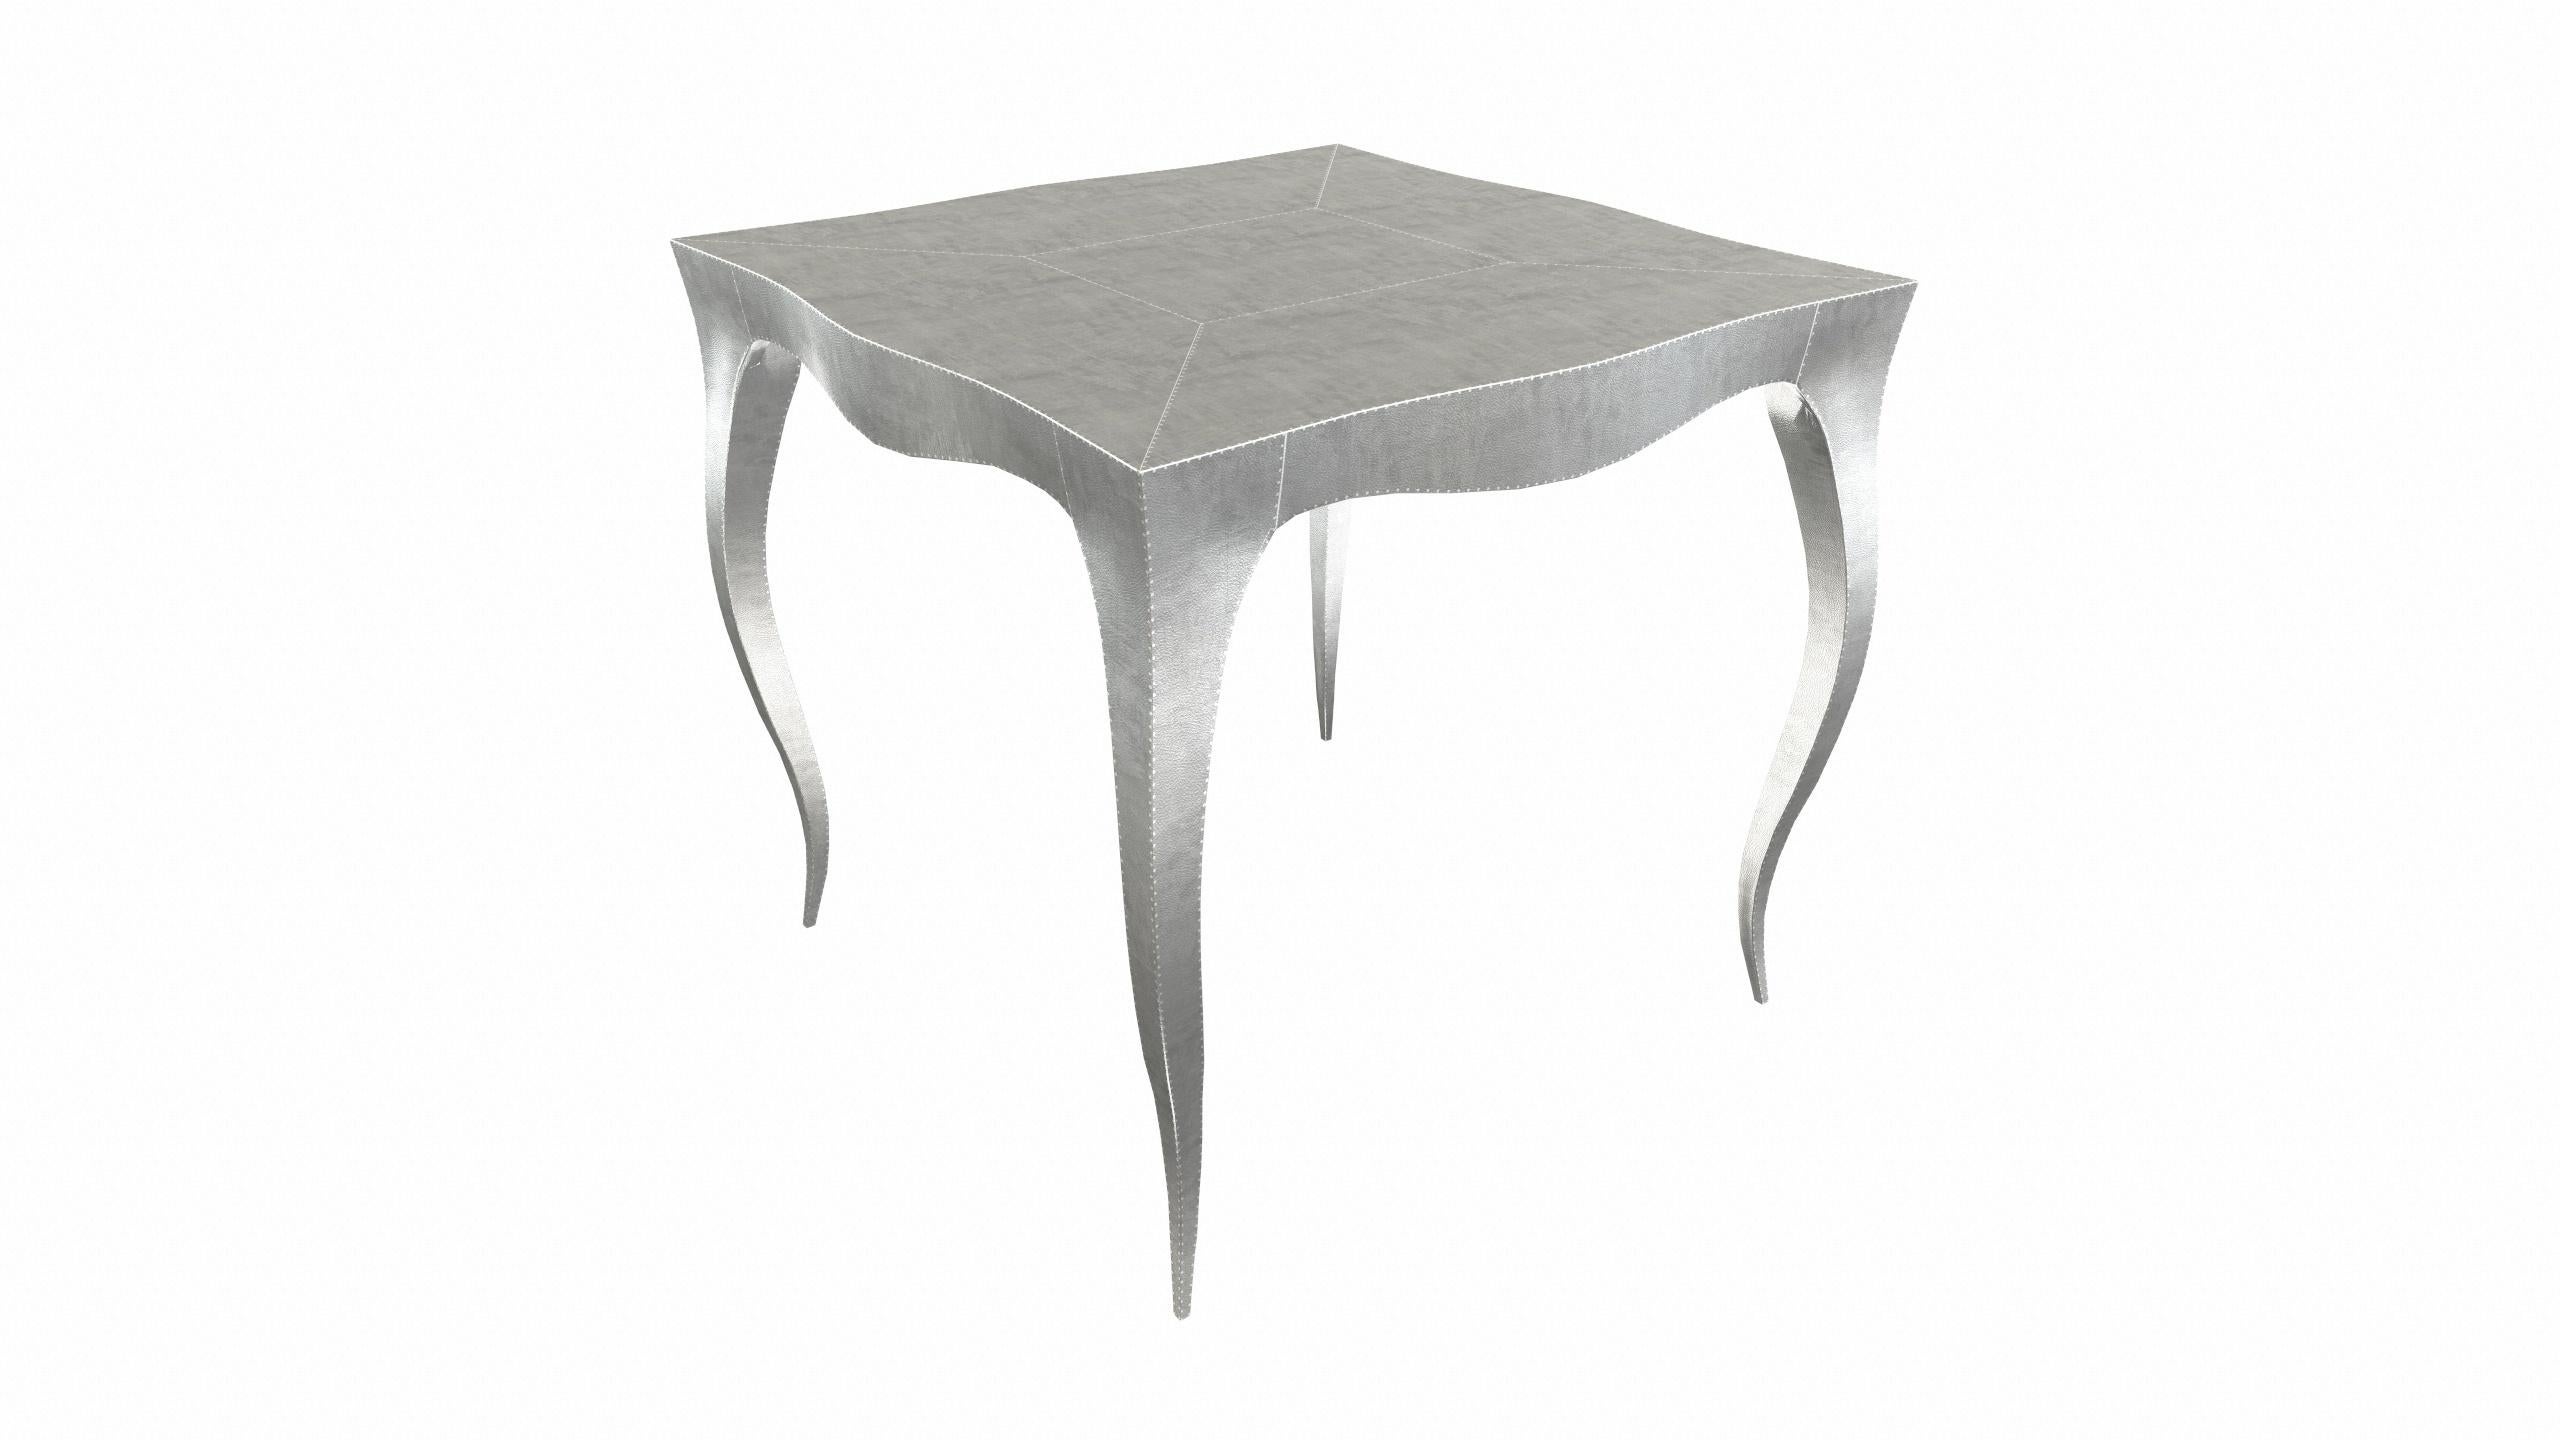 American Louise Art Deco Conference Tables Fine Hammered White Bronze by Paul Mathieu For Sale